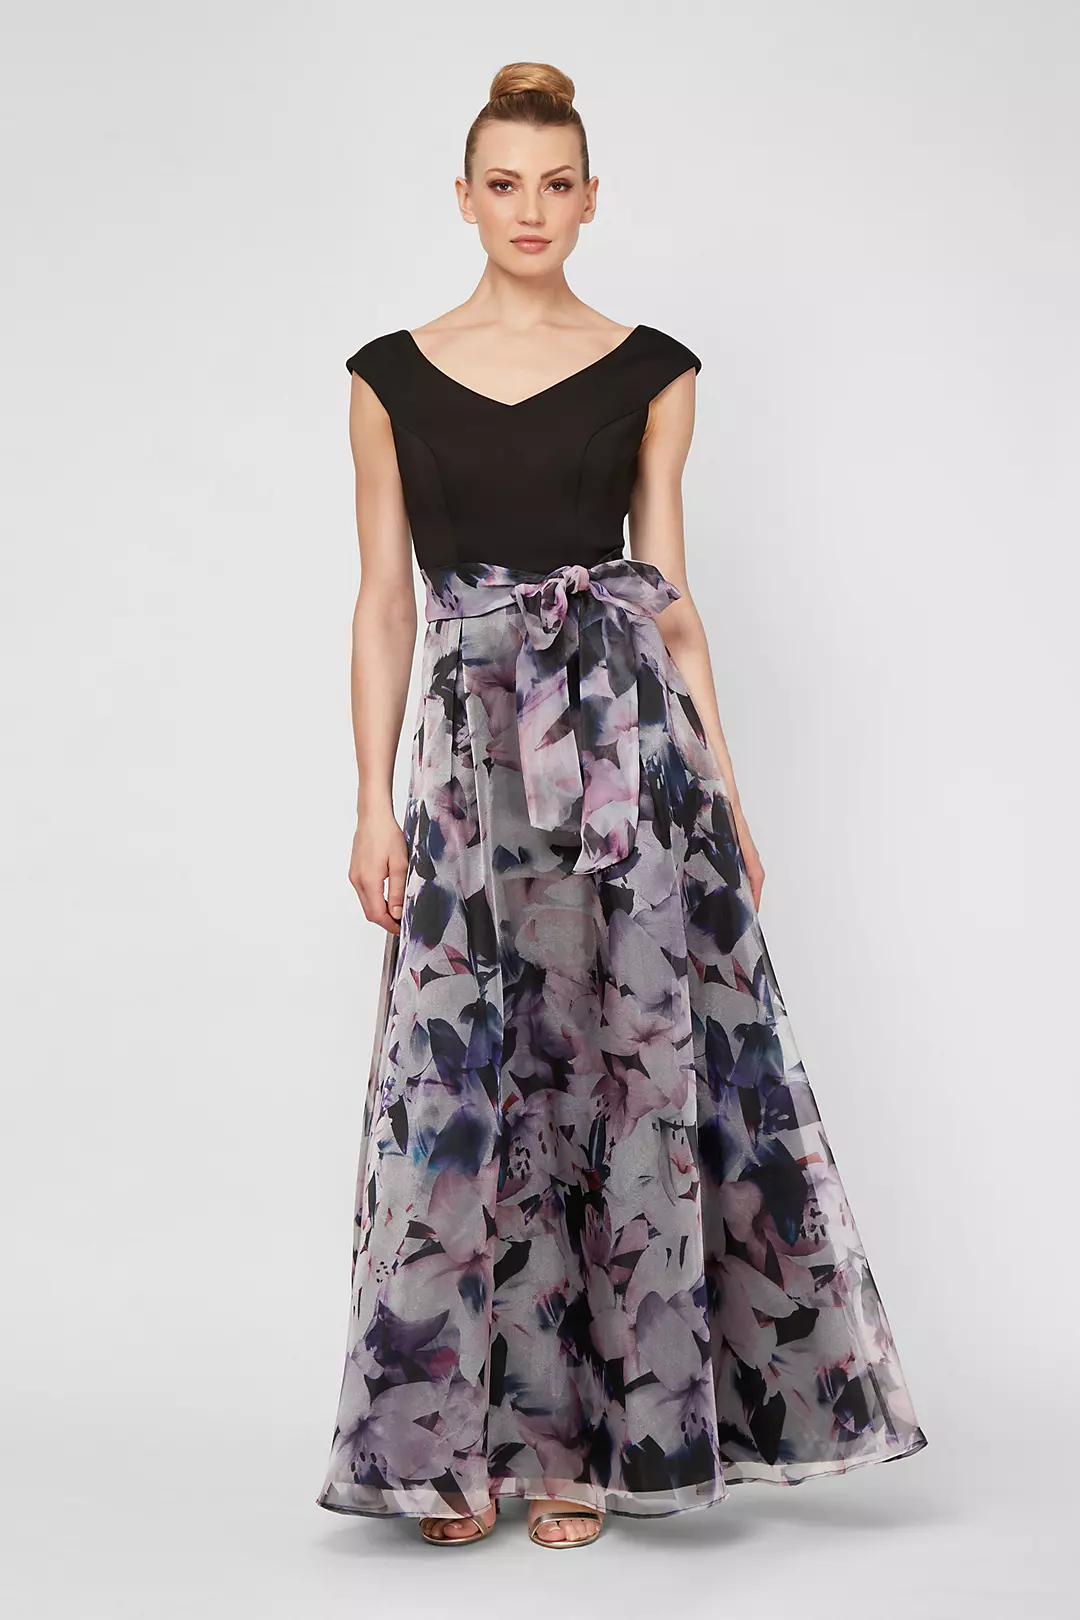 Cap Sleeve Ball Gown with Printed Organza Skirt Image